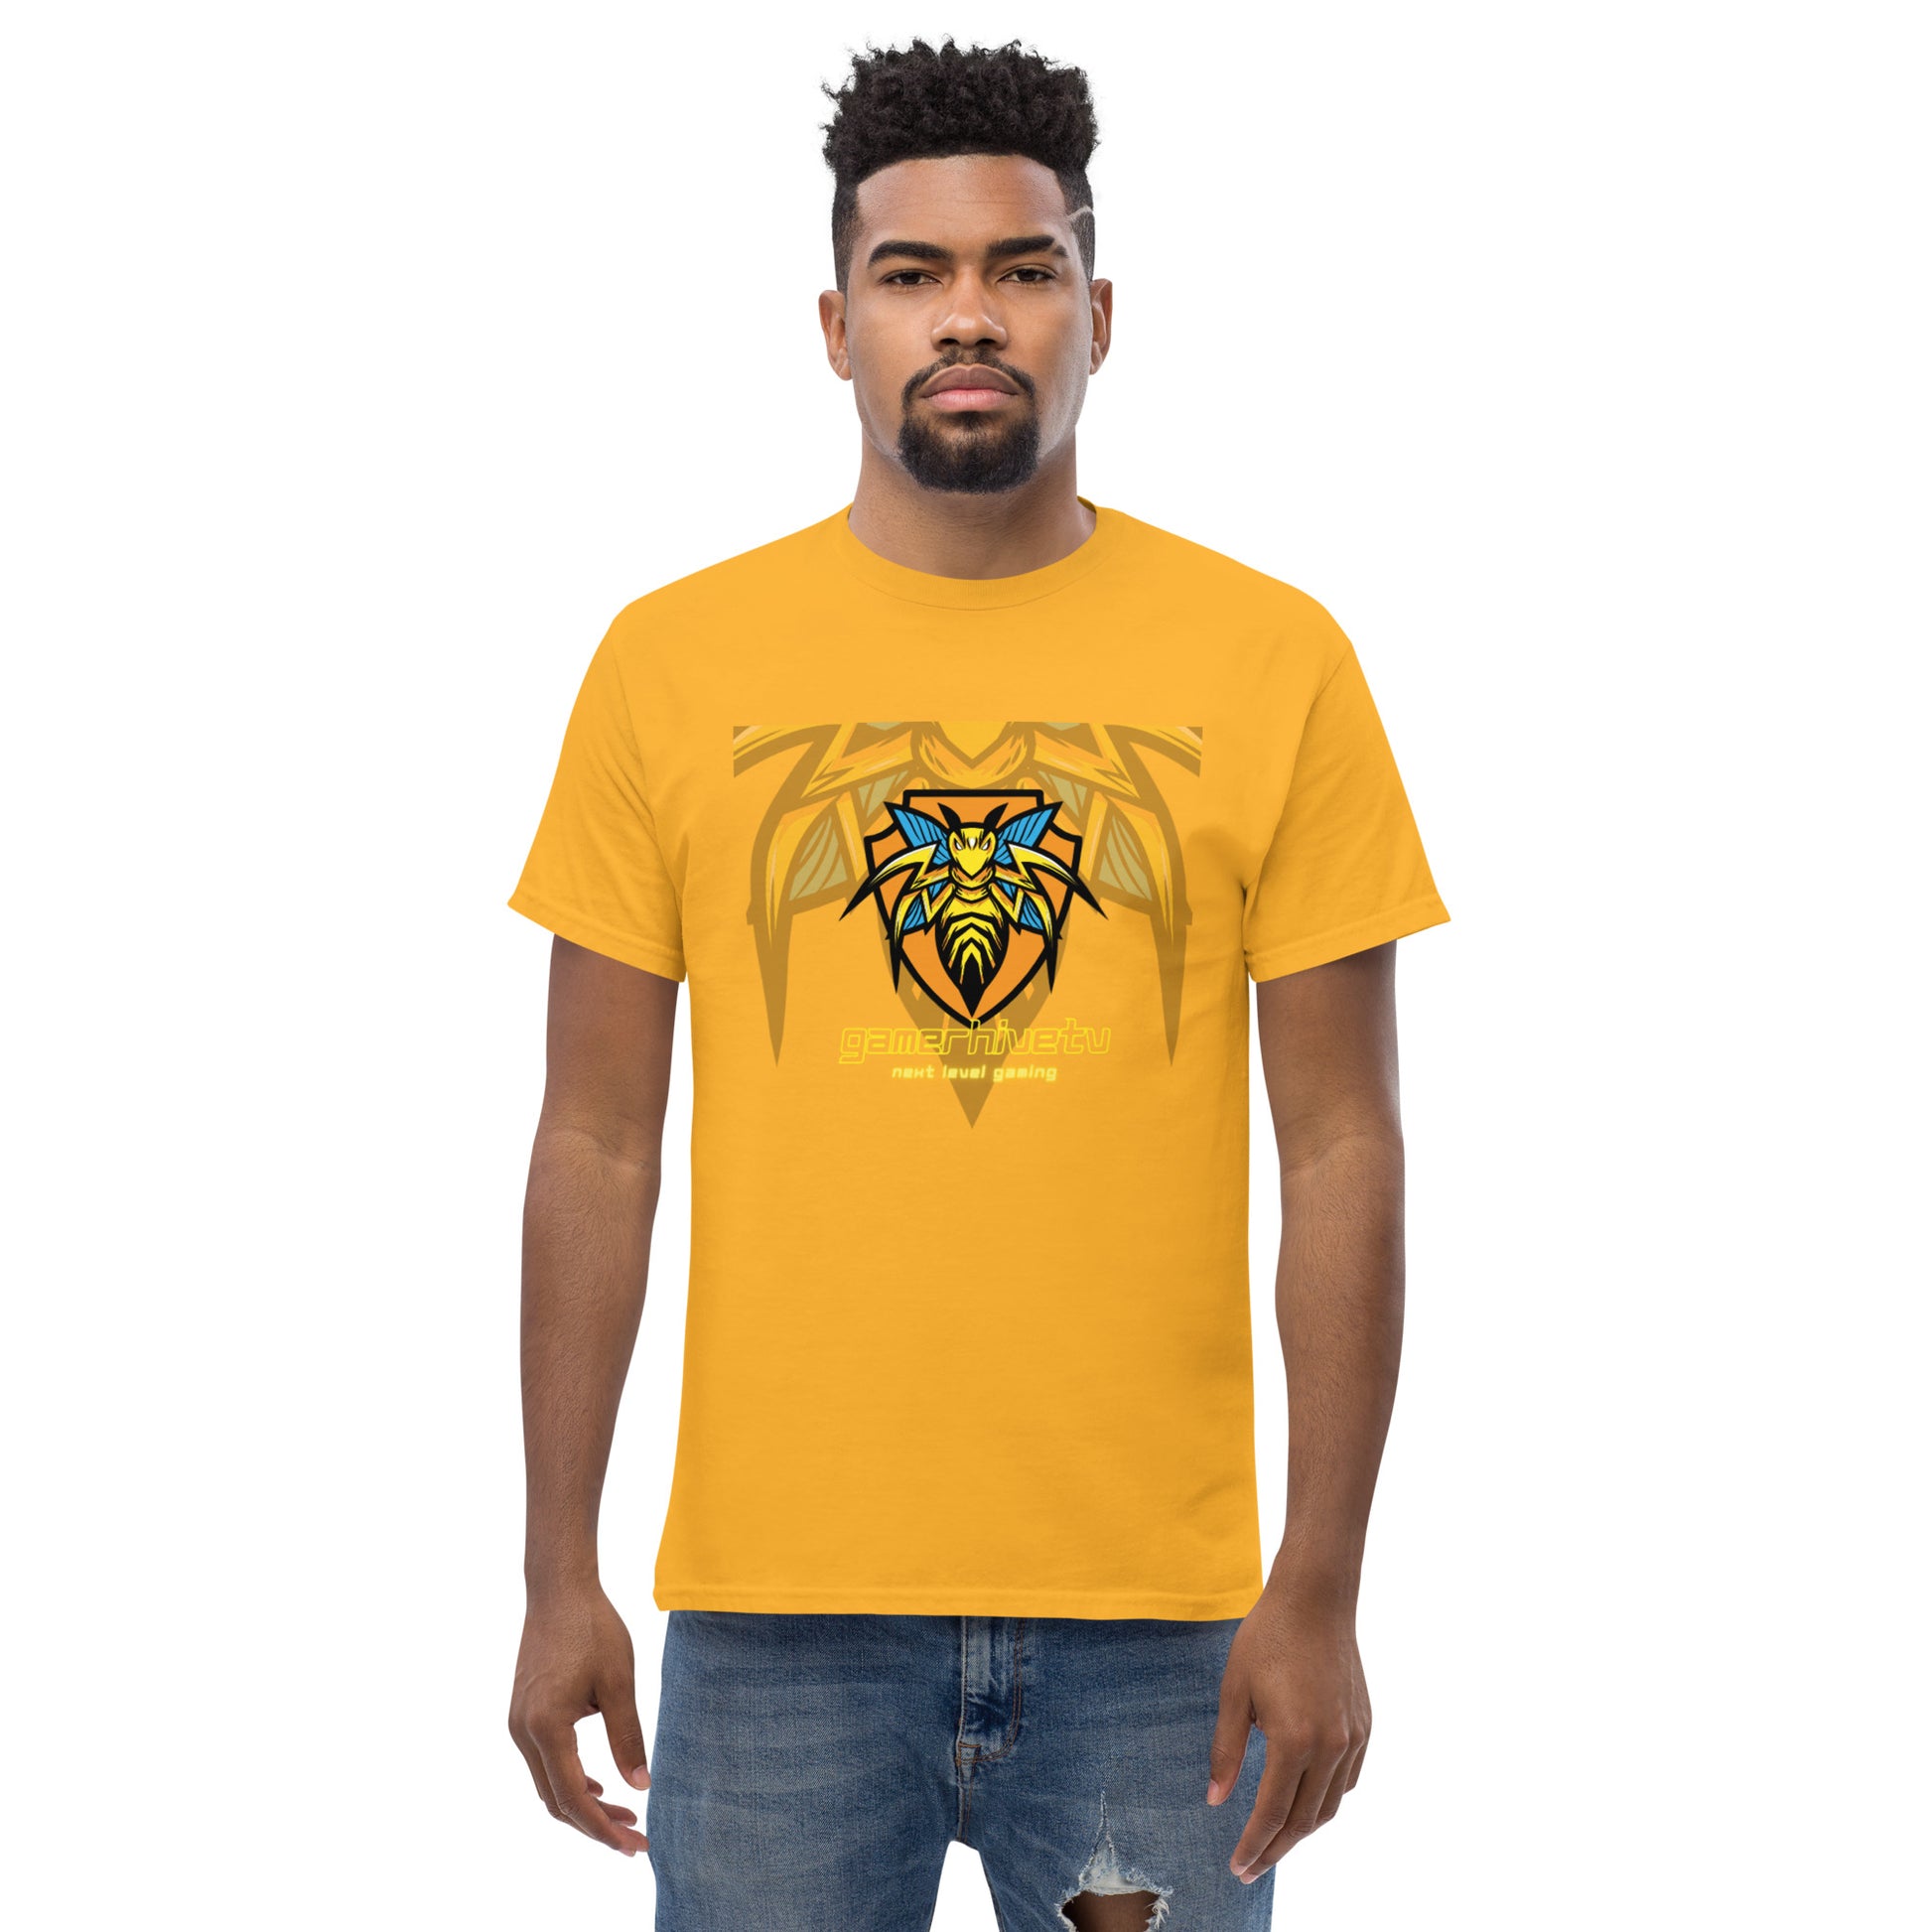 Man in gold classic tee, with the GamerHiveTV brand